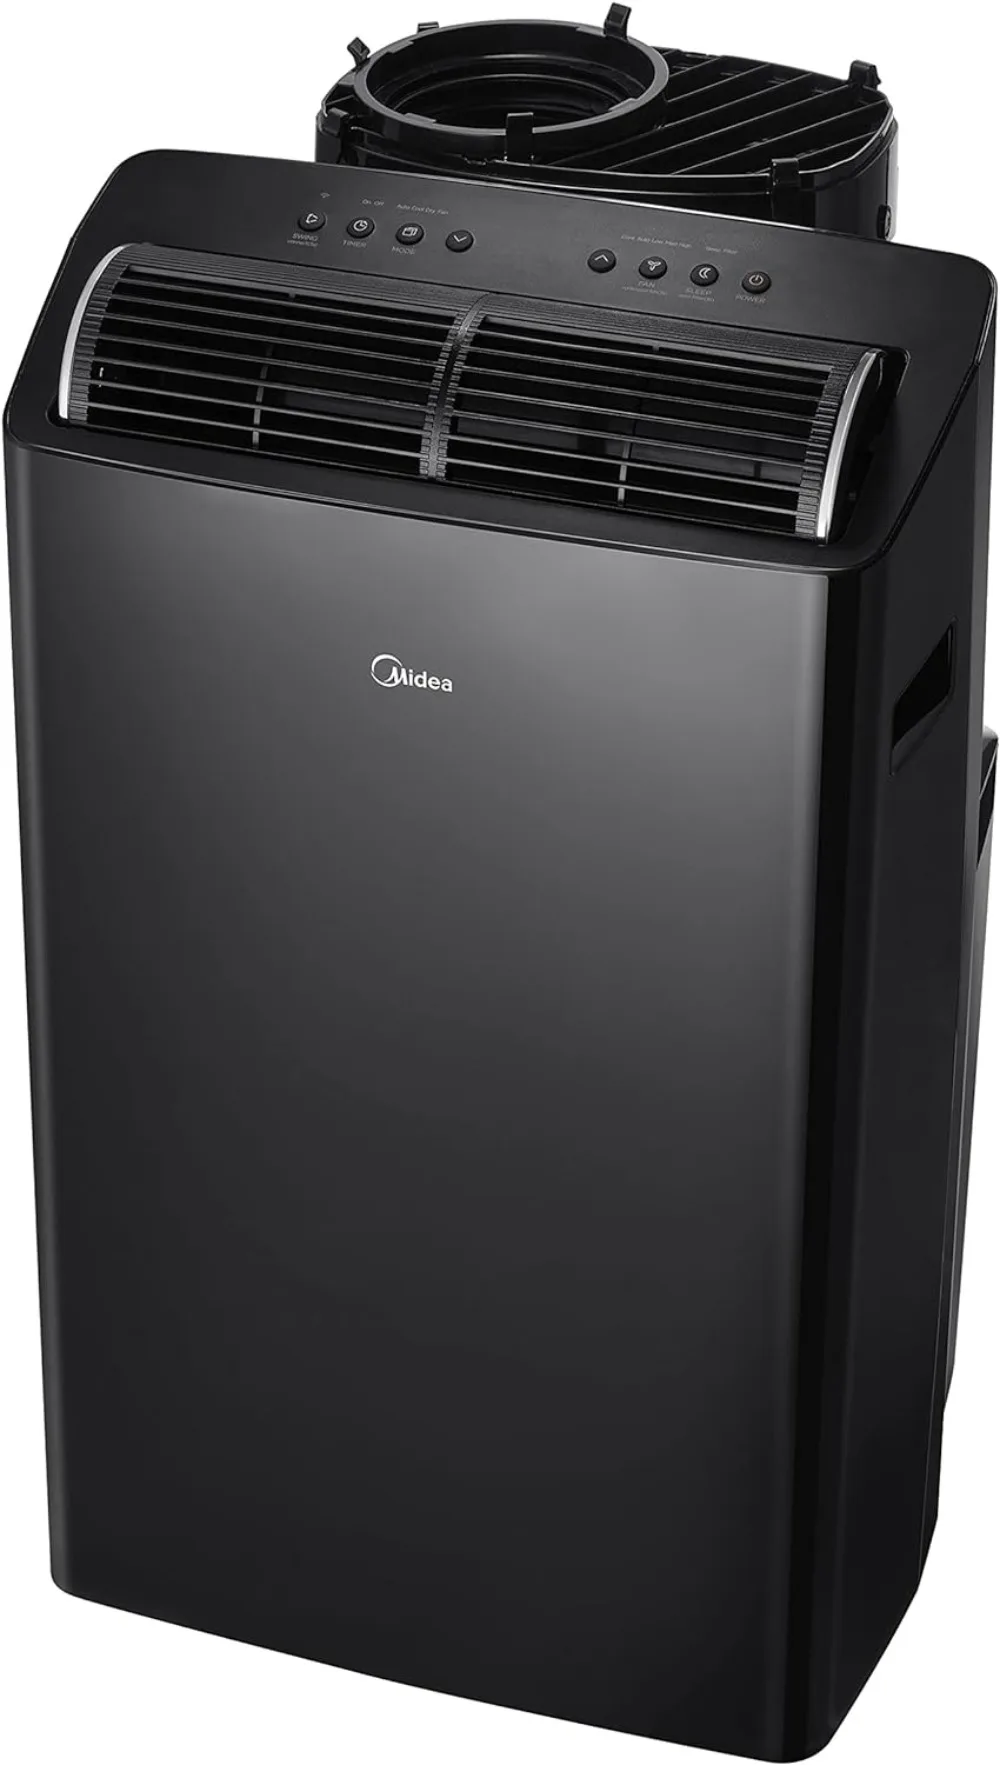 

Duo 14,000 BTU (12,000 BTU SACC) High Efficiency Inverter Ultra Quiet Portable Air Conditioner,with Heat up to 550 Sq. Ft.